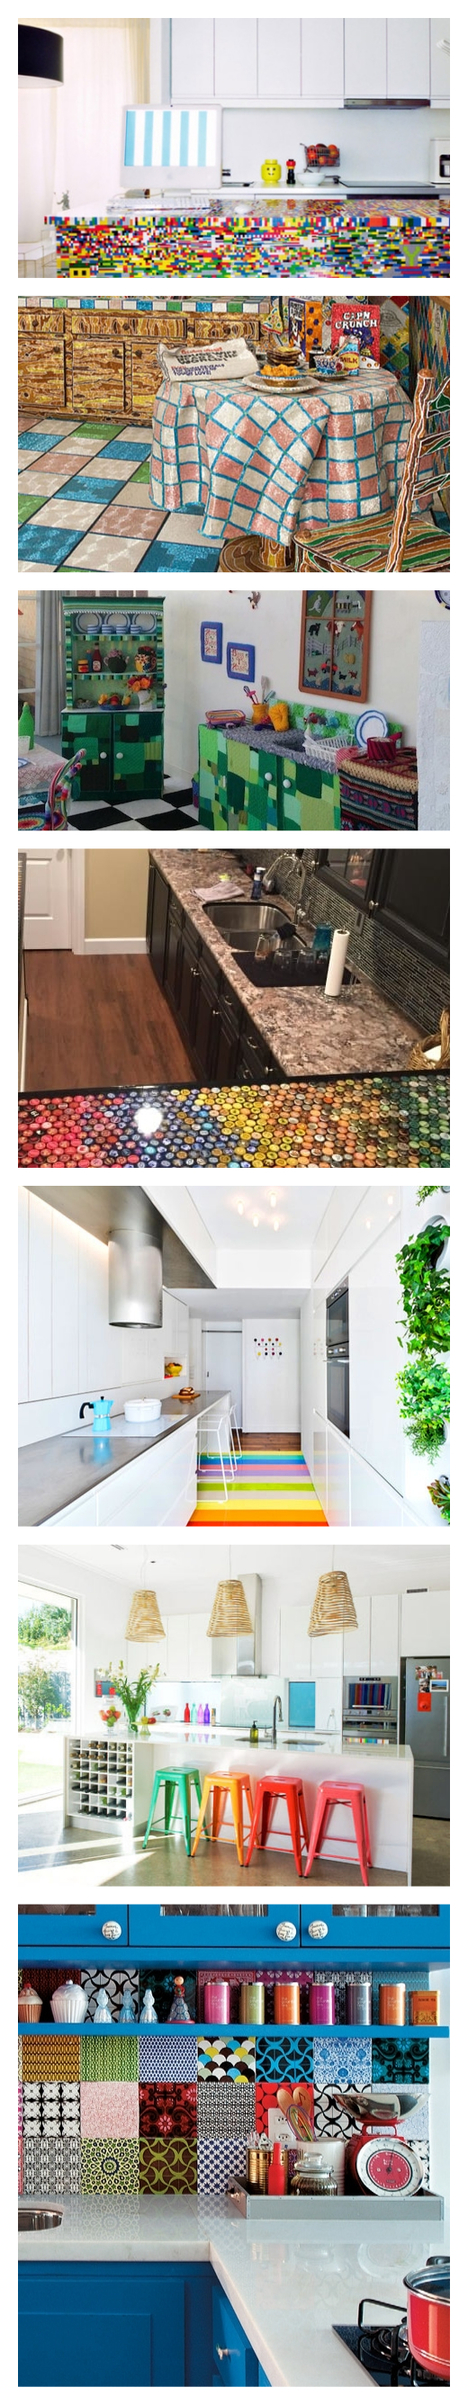 Brilliantly Crazy, Colourful and Creative Kitchens